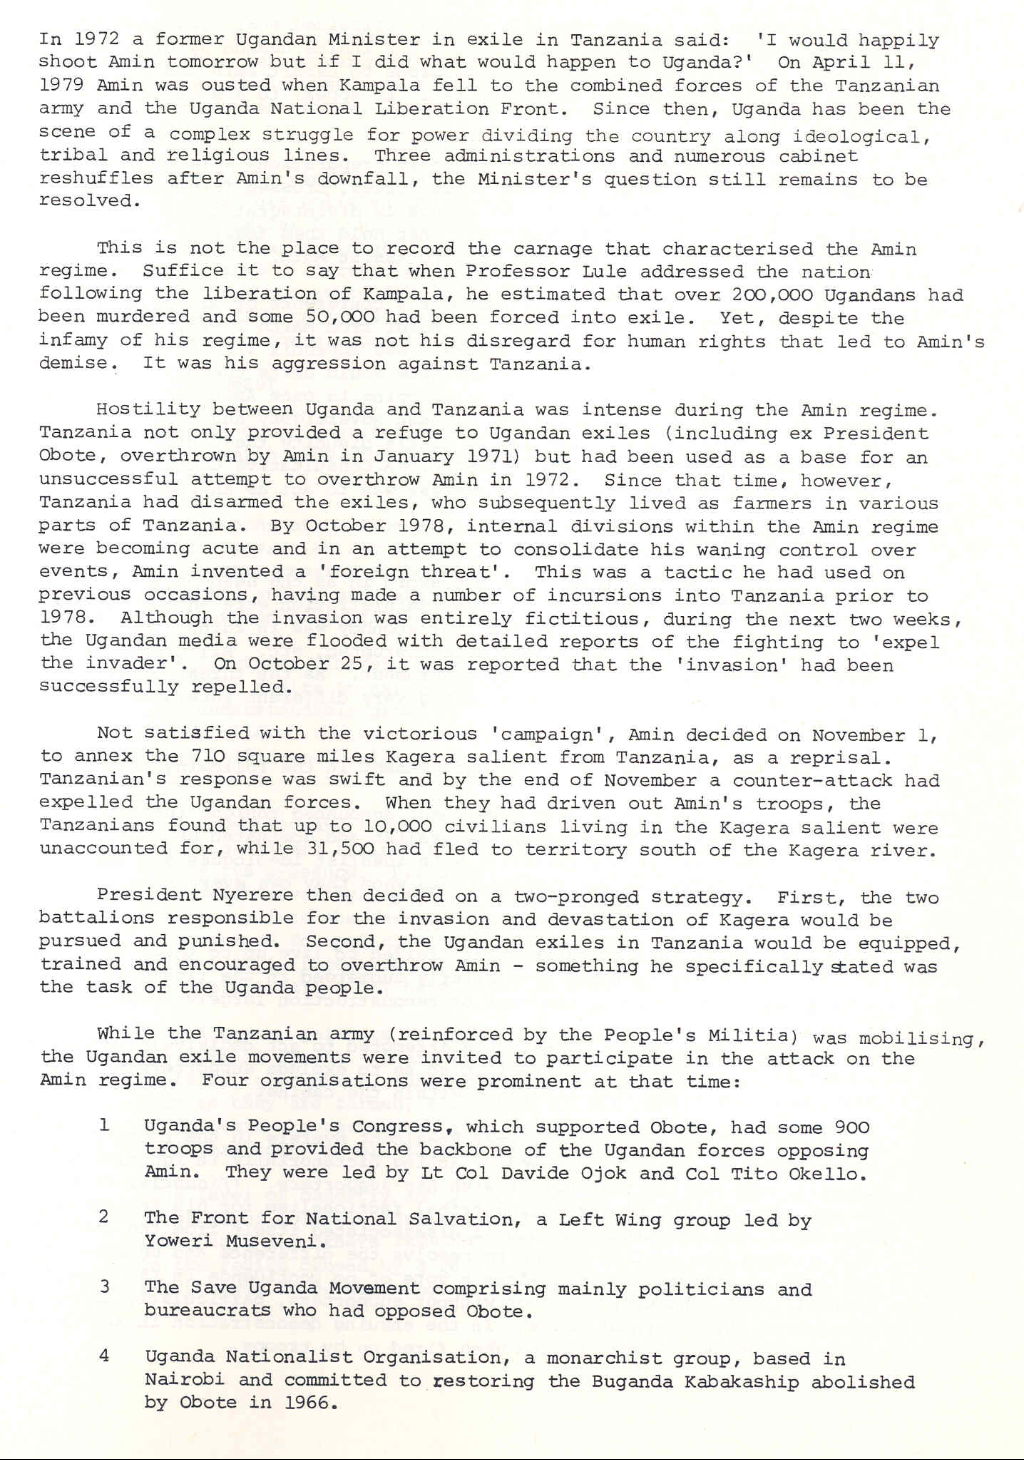 Labour Party information paper on 'Uganda after Amin', 1980